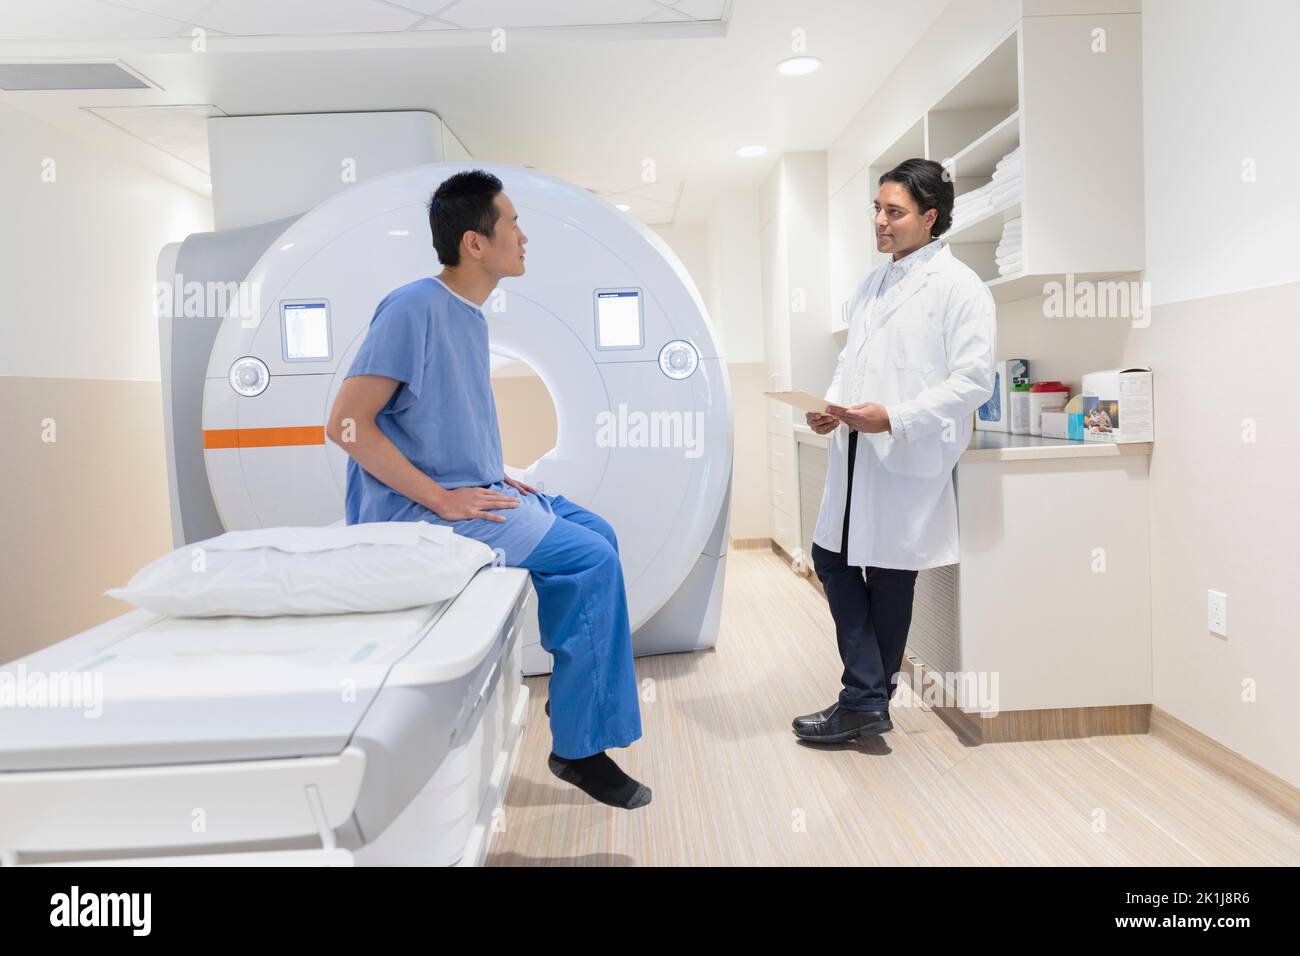 Radiology technologist talking to MRI scan patient Stock Photo